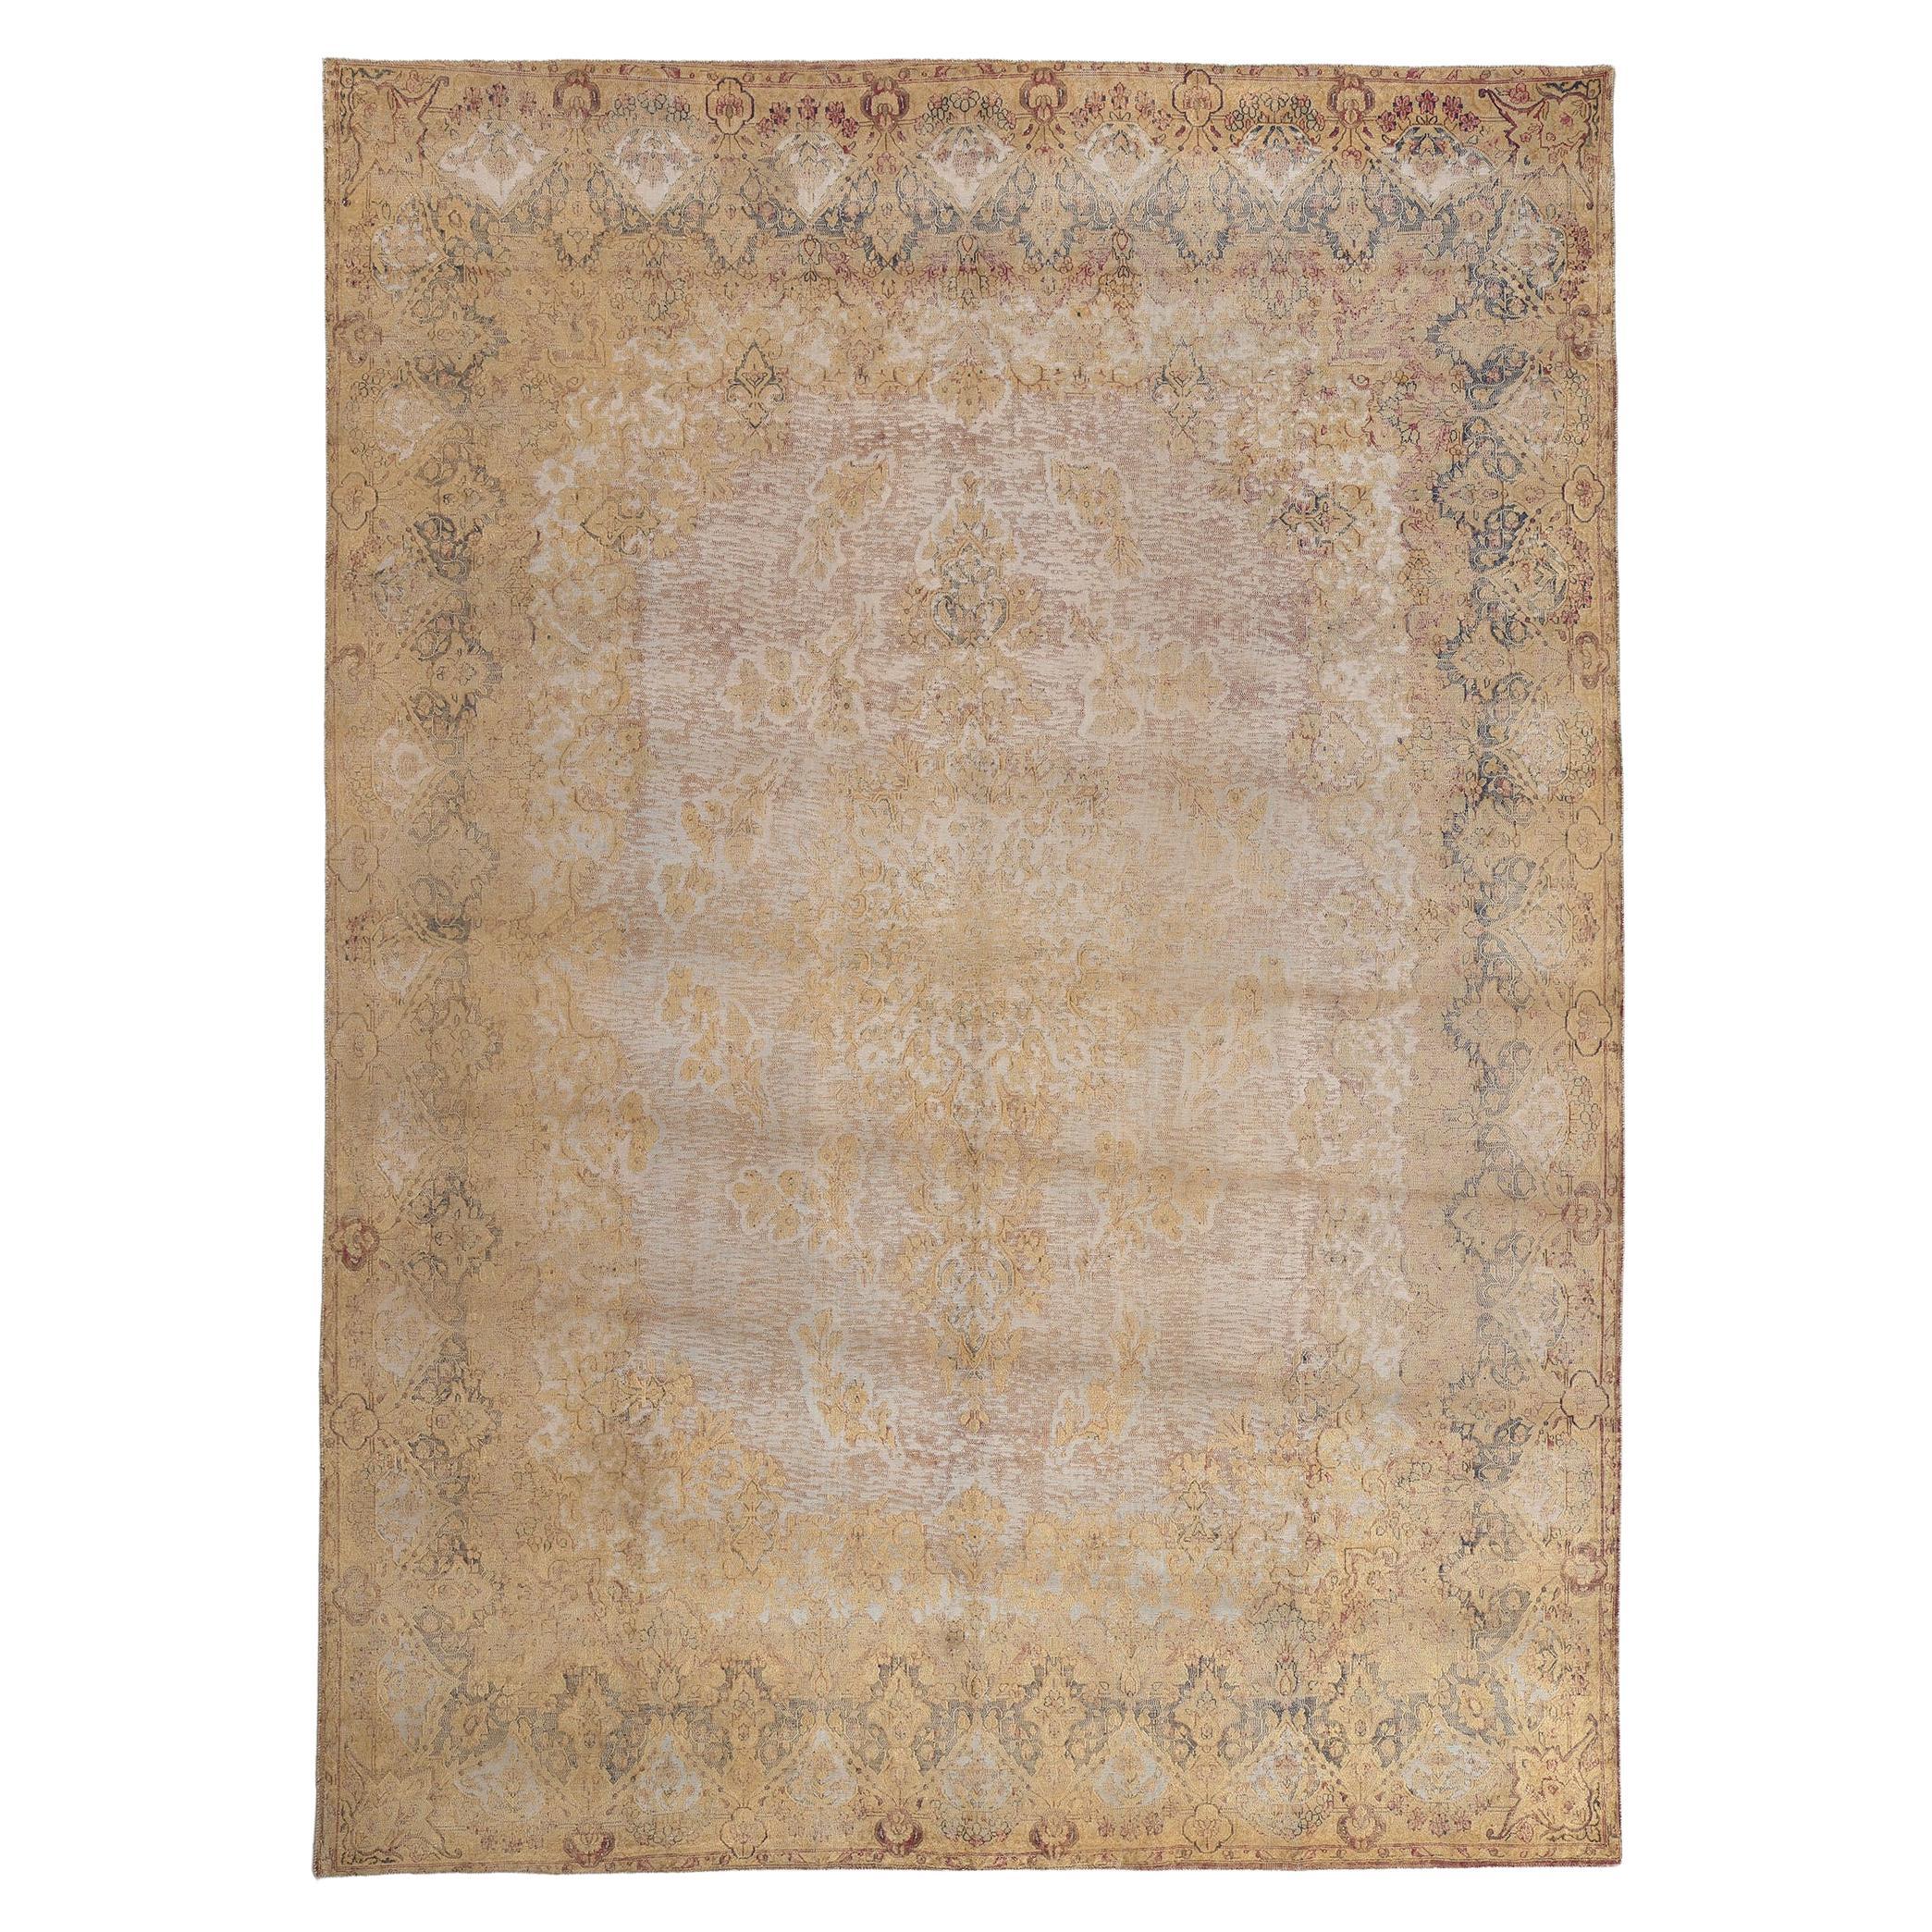 Vintage Turkish Overdyed Rug, French Industrial Meets Belgian Chic For Sale